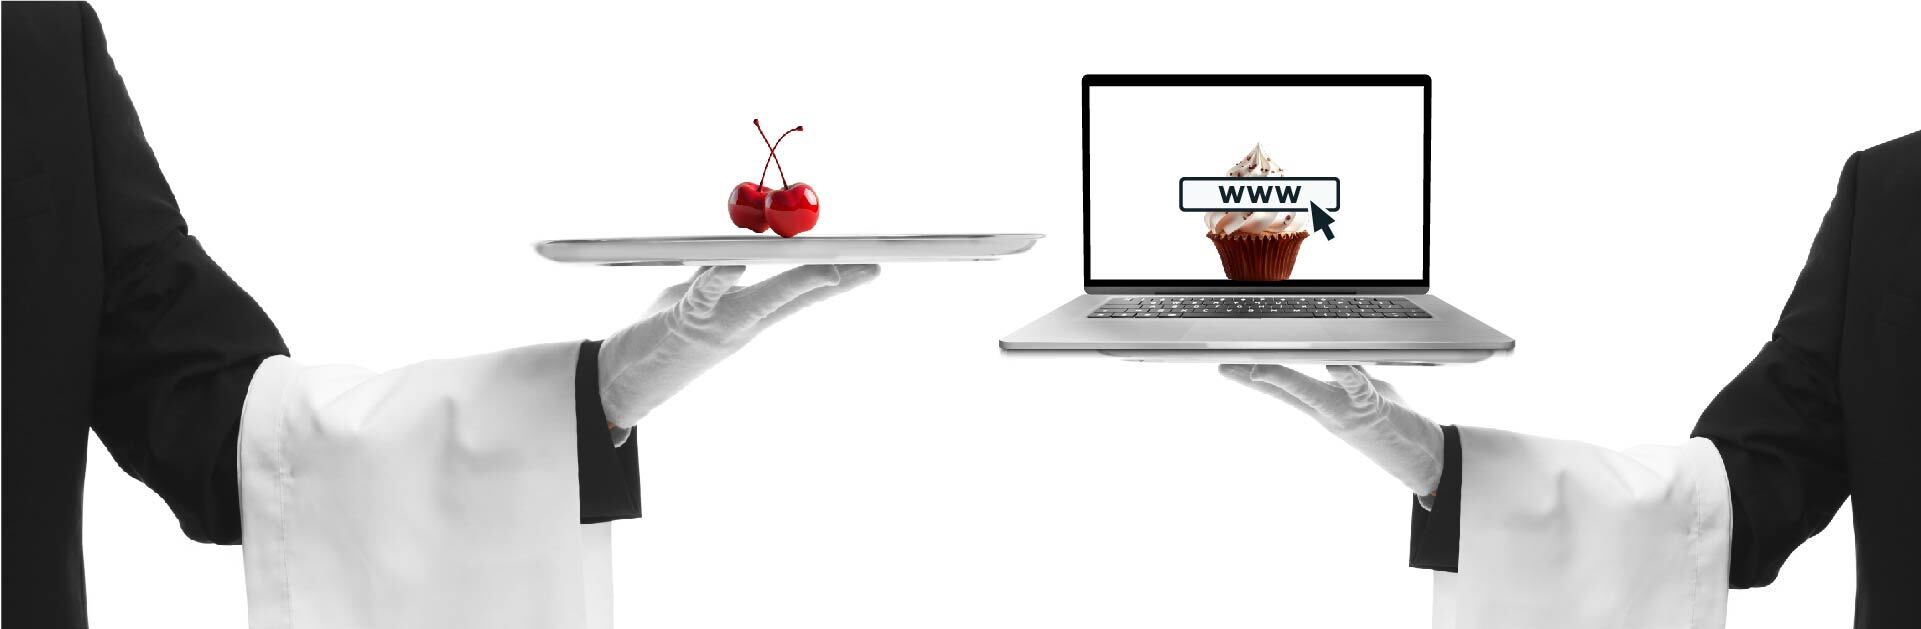 Website Maintenance Services and Why Your Site Can’t Live Without Them